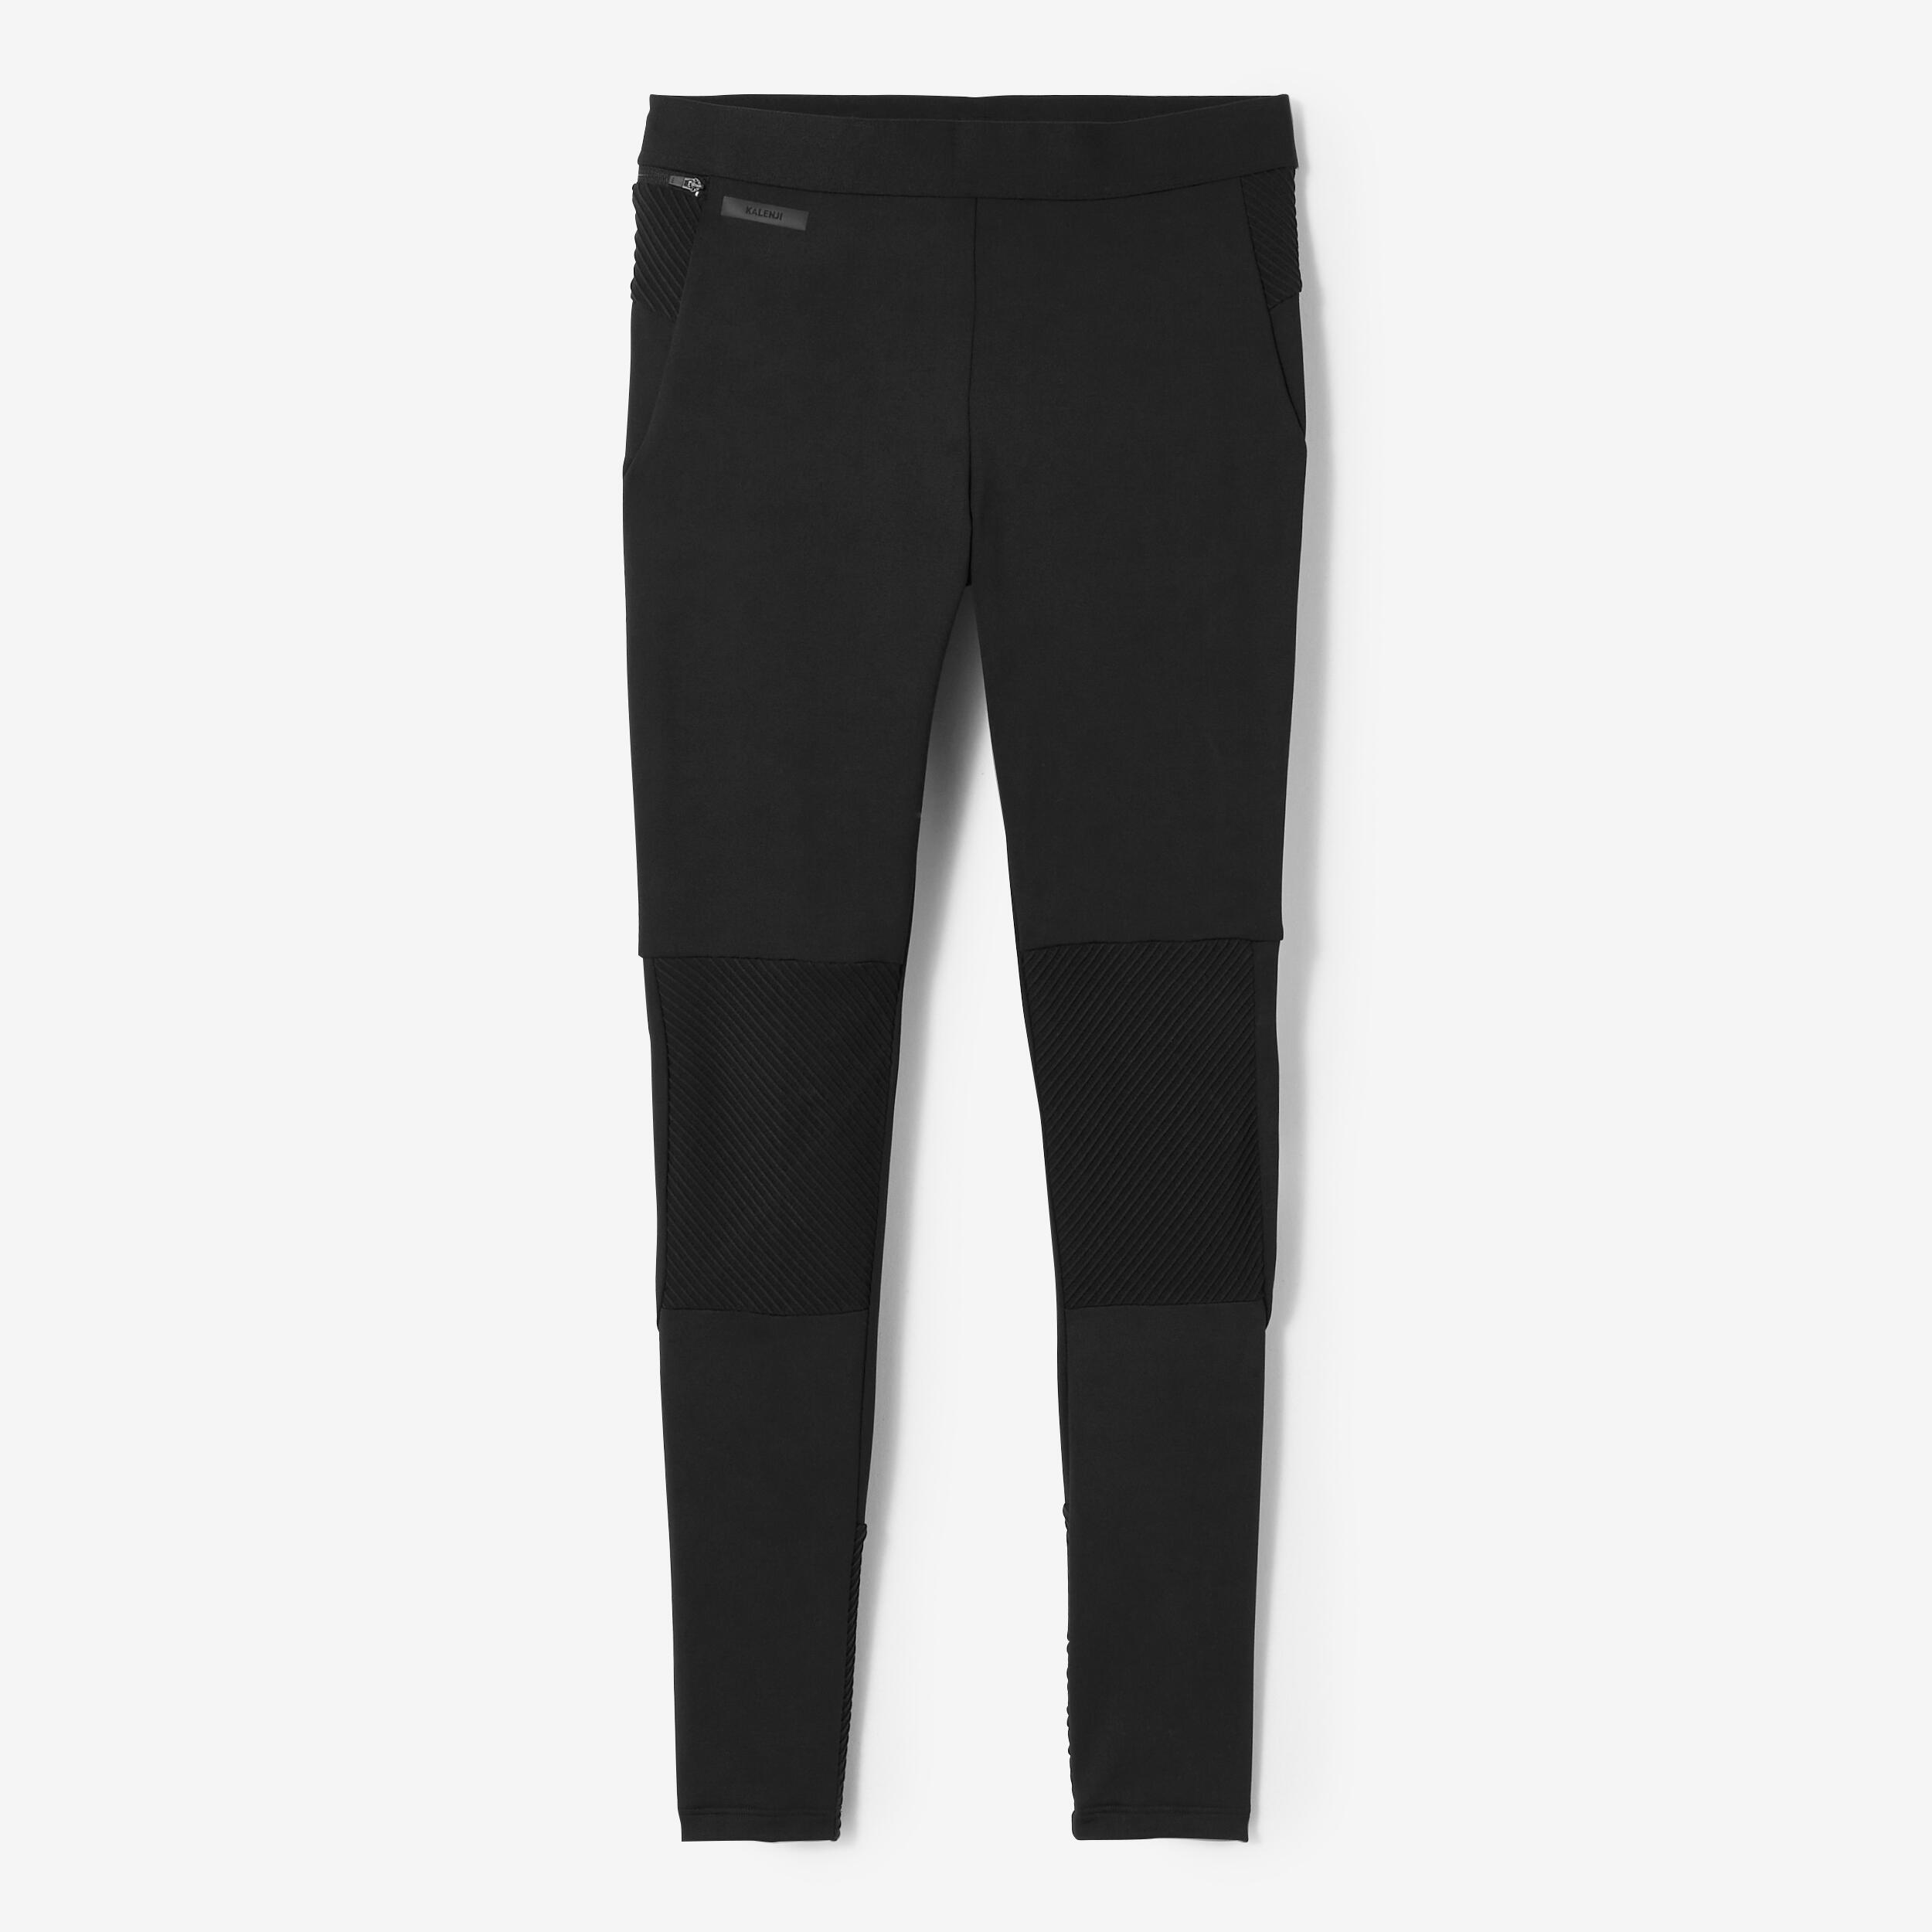 Fast Dry Compression Running Leggings For Men Sexy Fitness Decathlon Track  Pants For Training, Gym, And Workout Style X0824 From Fashion_official01,  $14.68